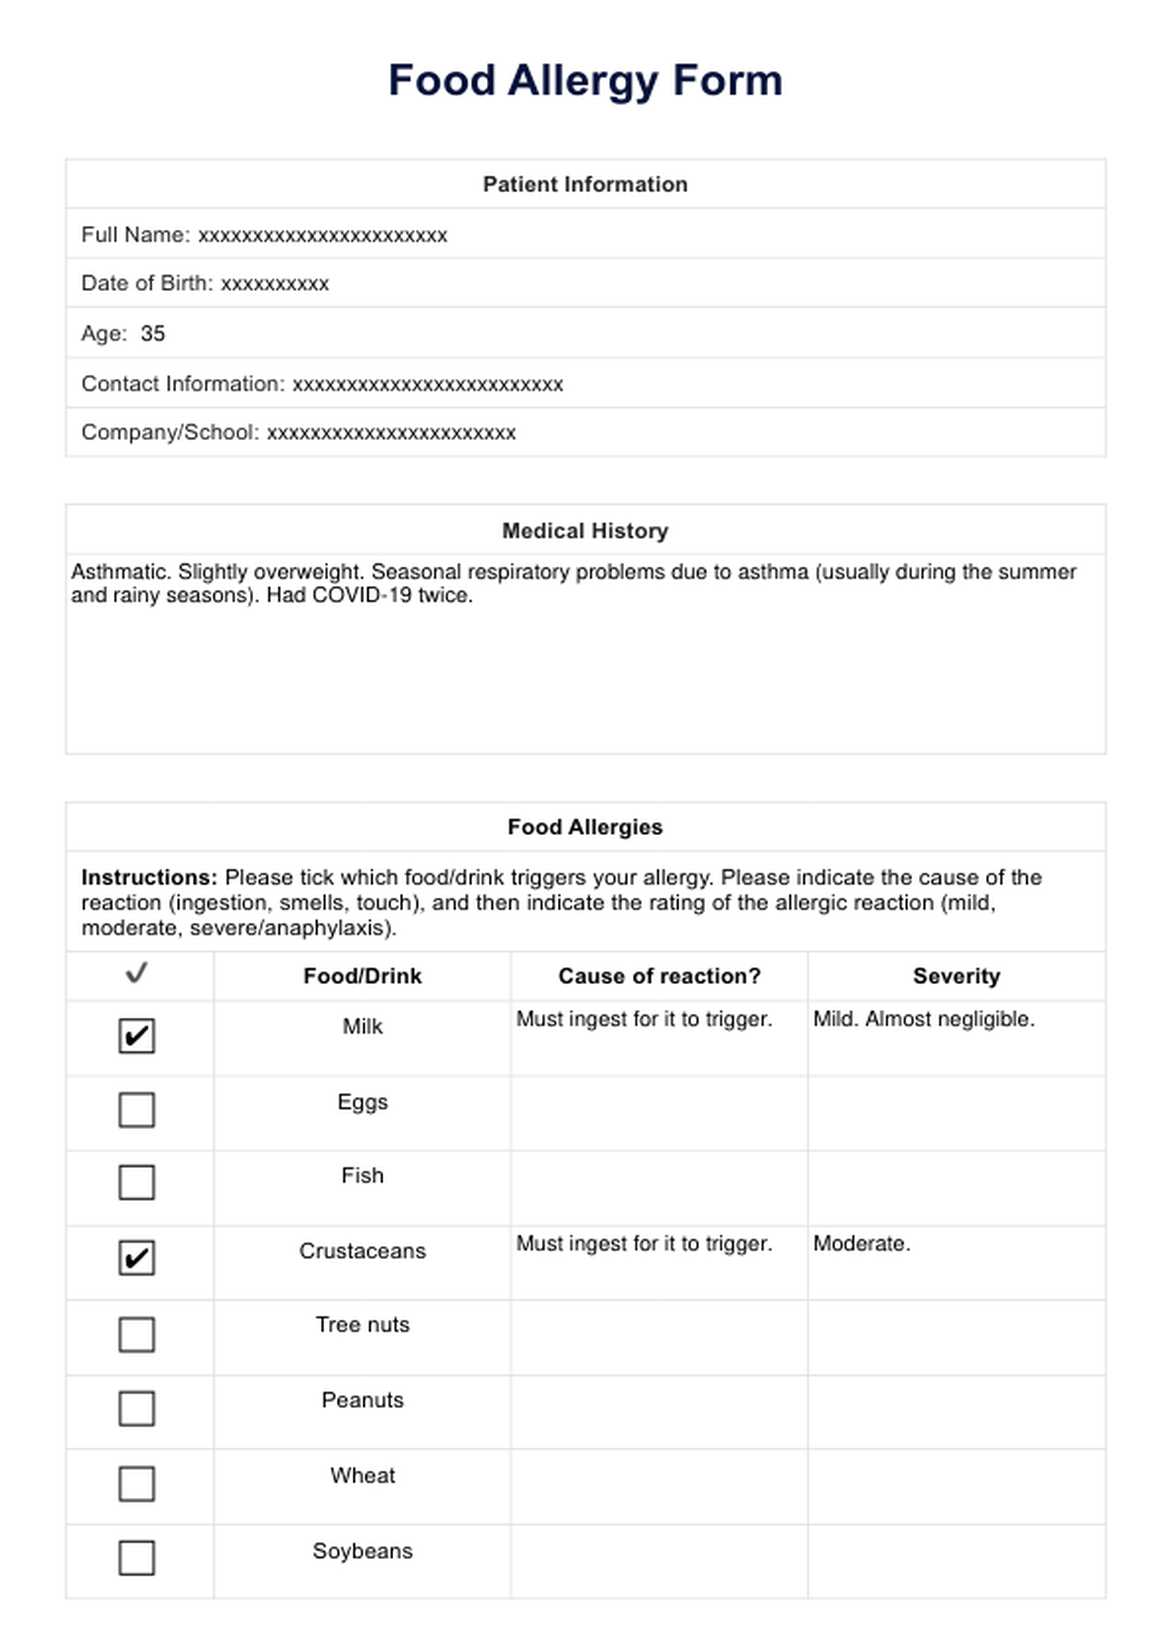 Food Allergy Form PDF Example